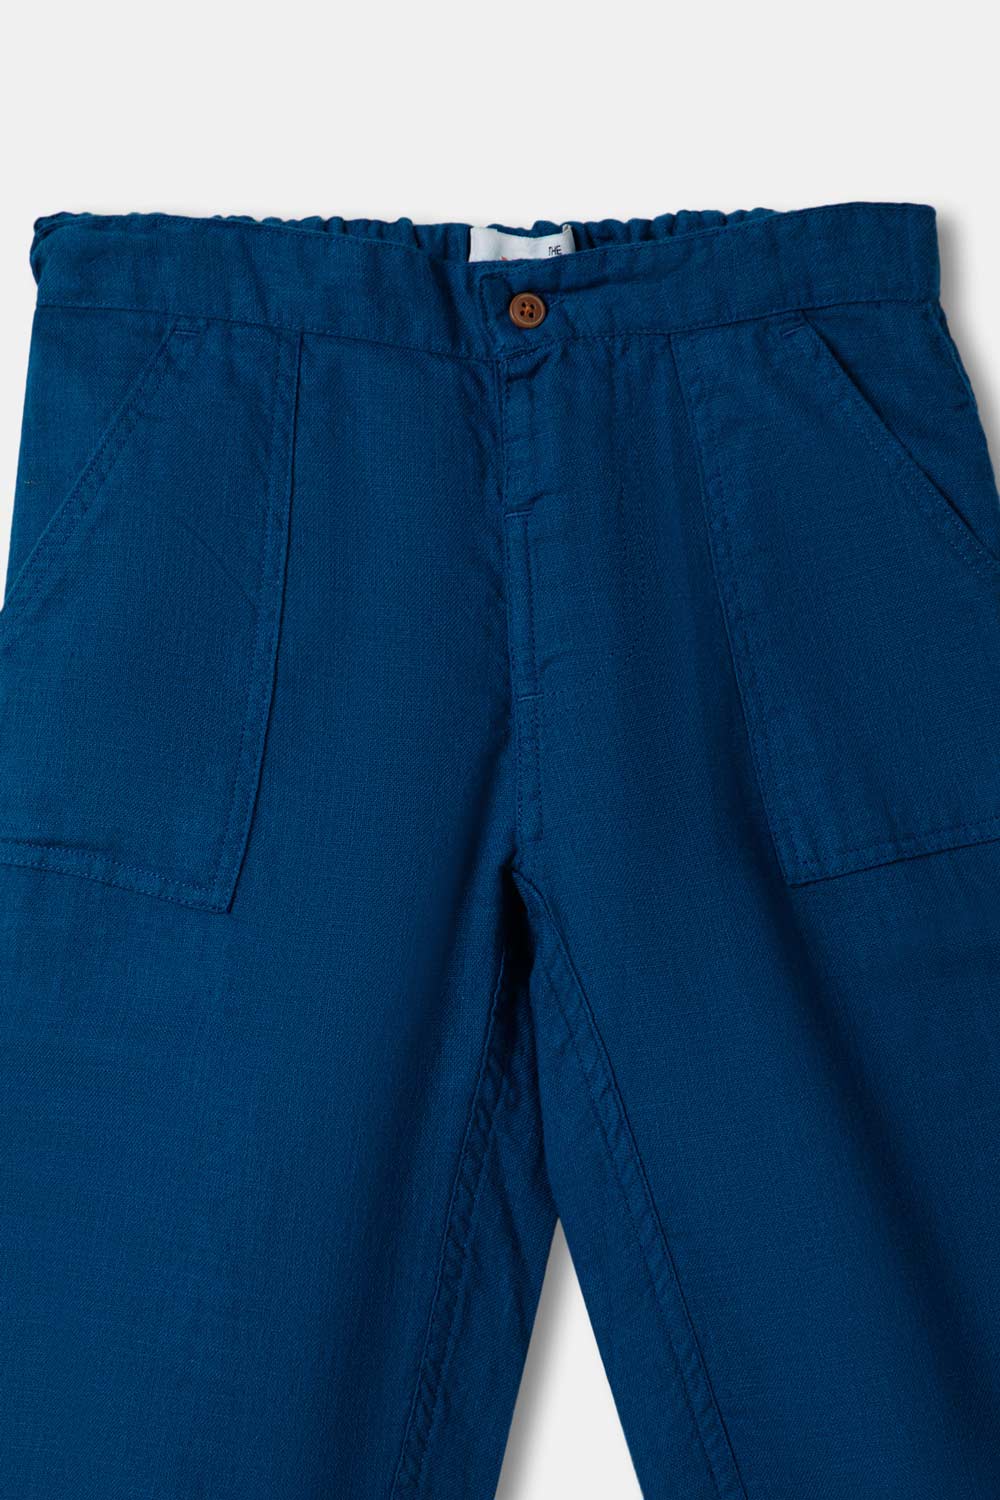 The Young Future  Pants for Boys  - Blue  - BT02